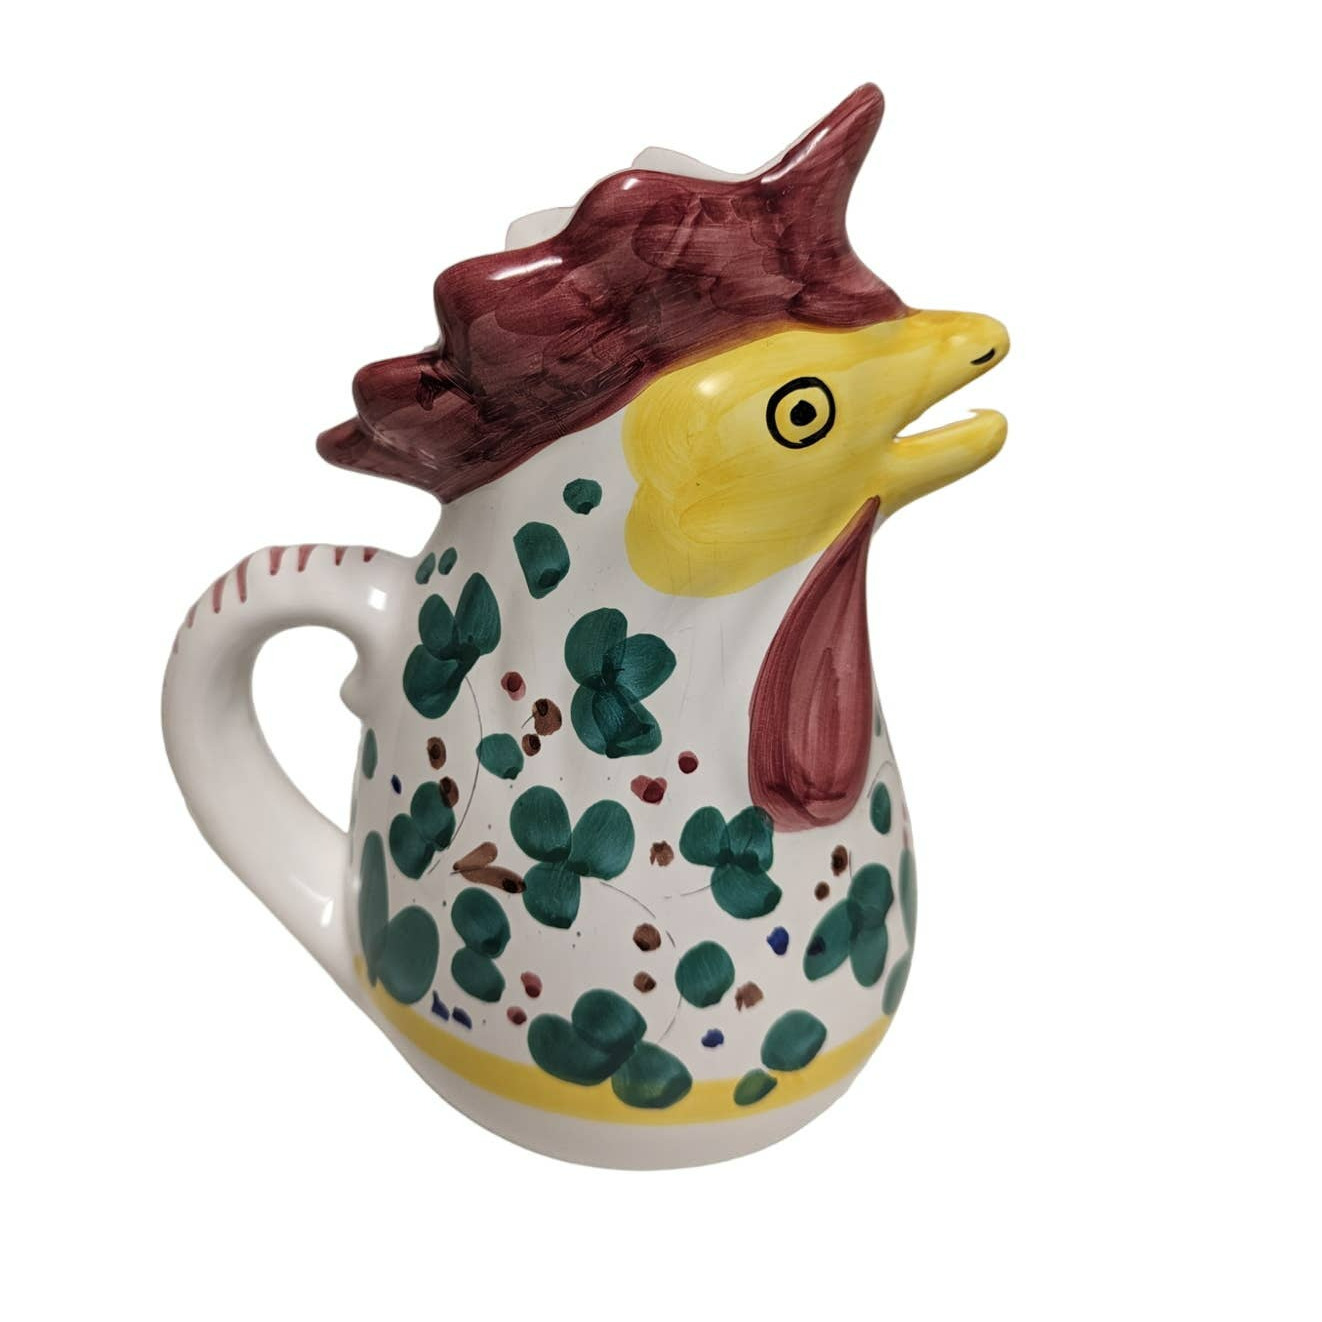 Vintage Ceramic Rooster Pitcher Hand Painted Made in Italy 